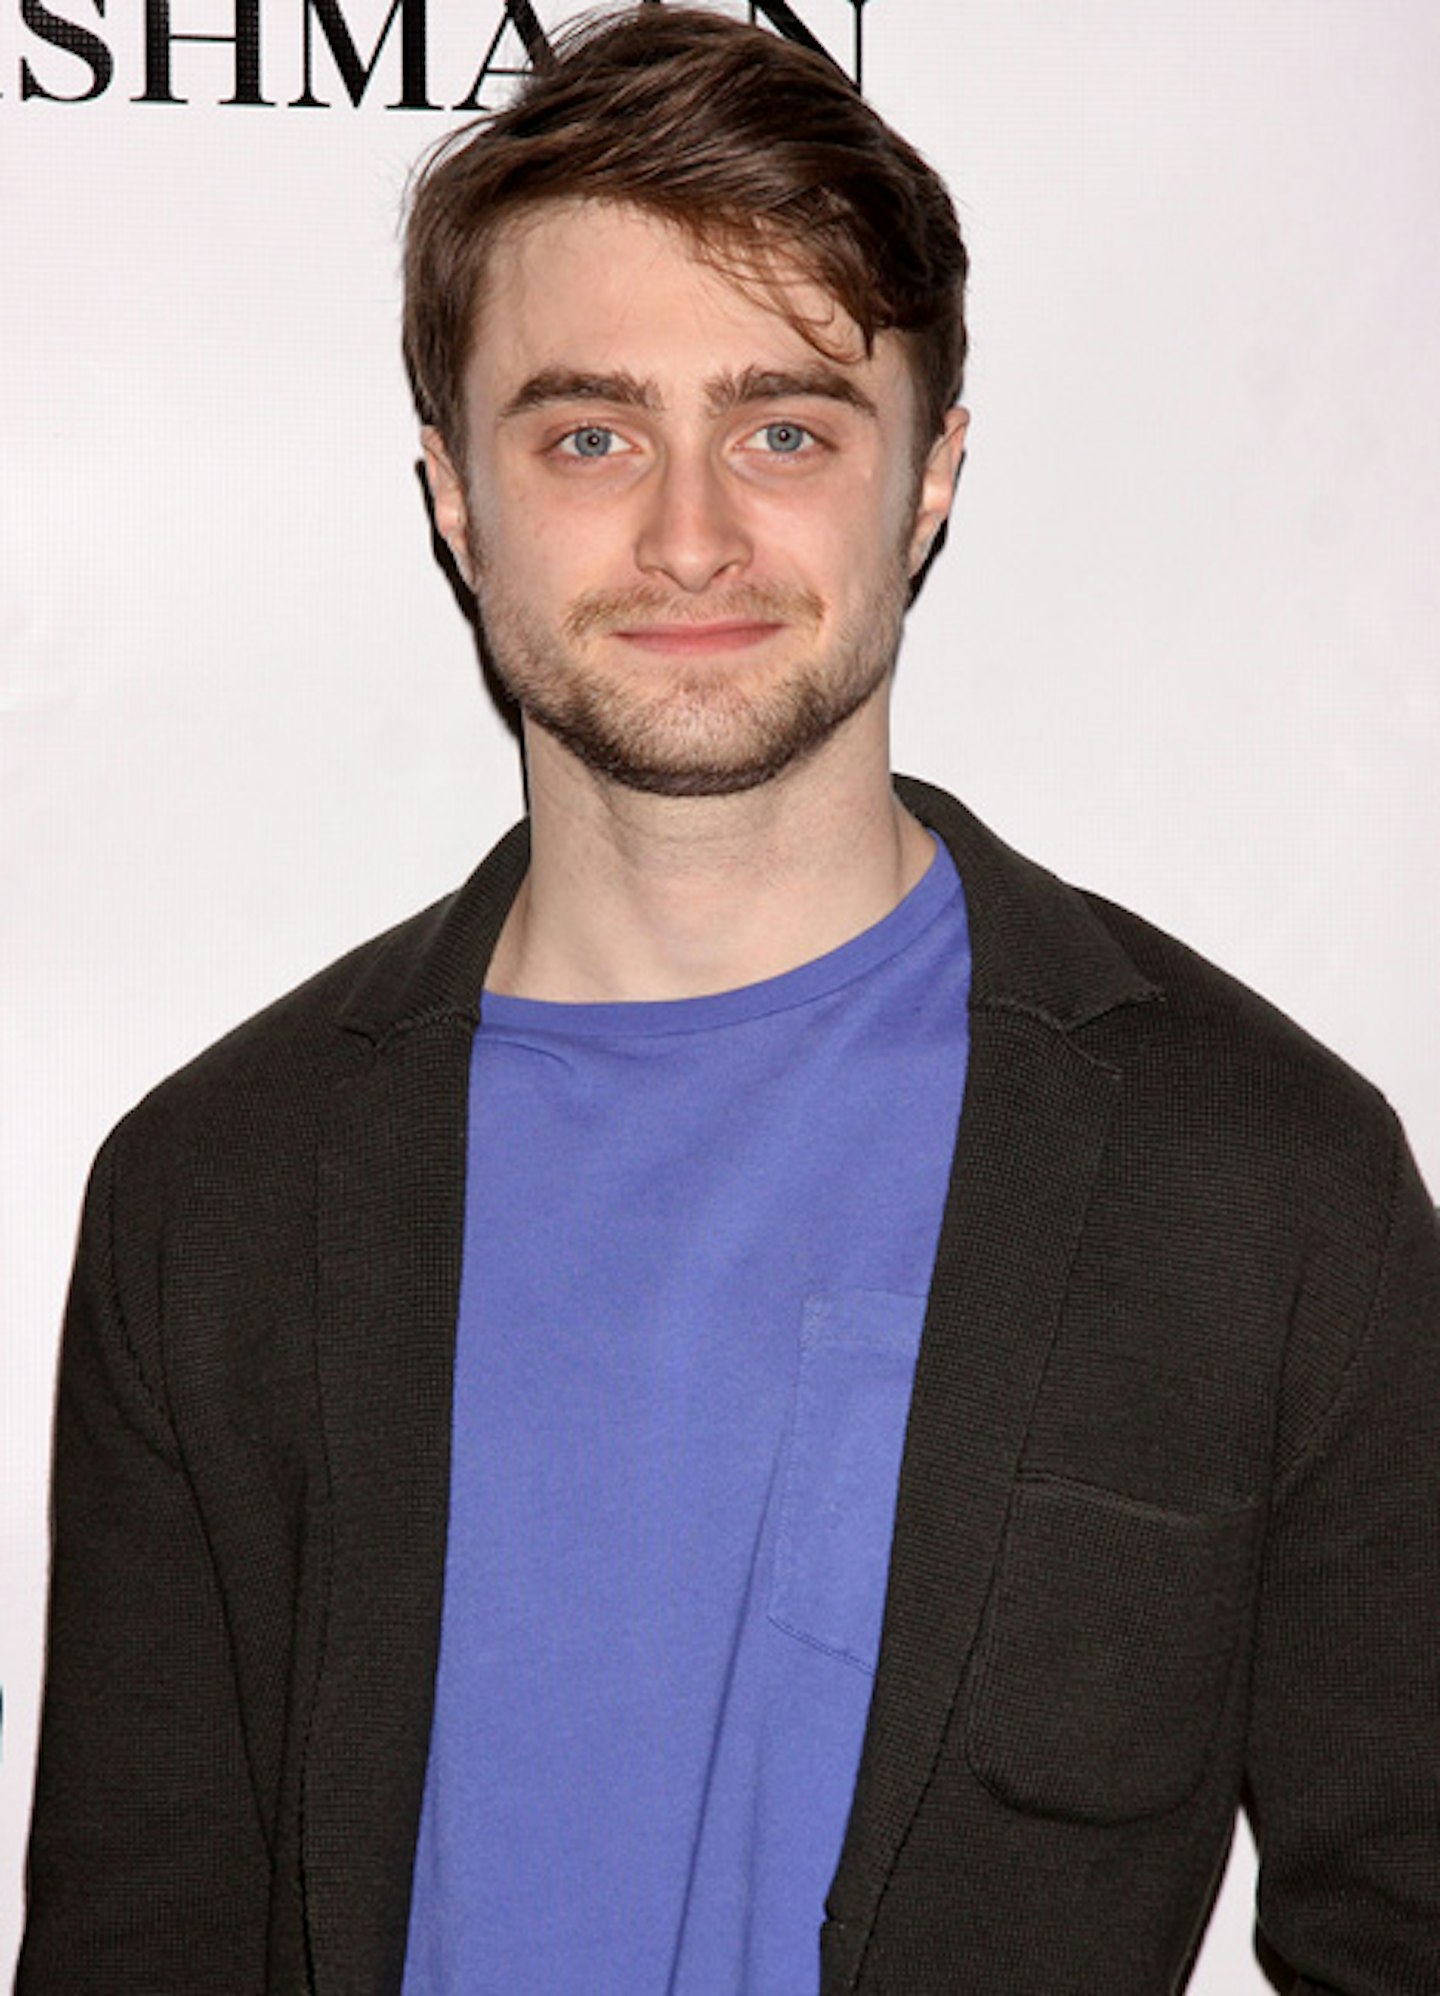 Daniel Radcliffe is currently working in New York